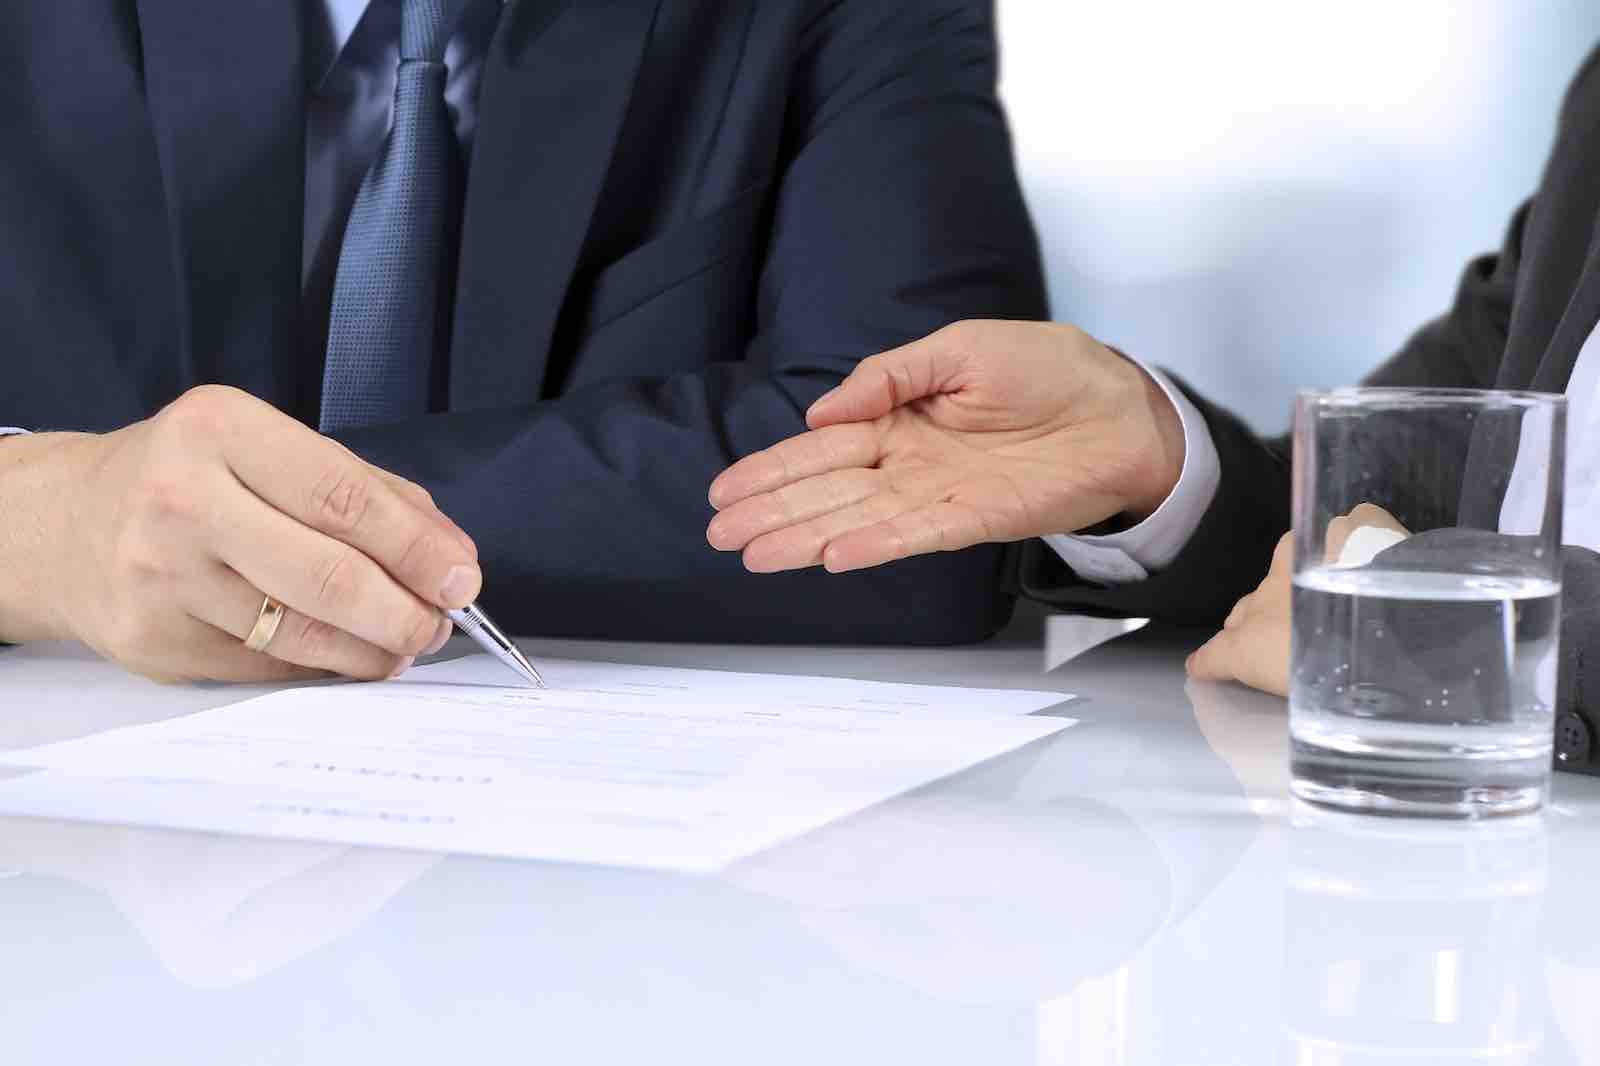 Wrongful termination in NJ: Questions to ask an employment attorney